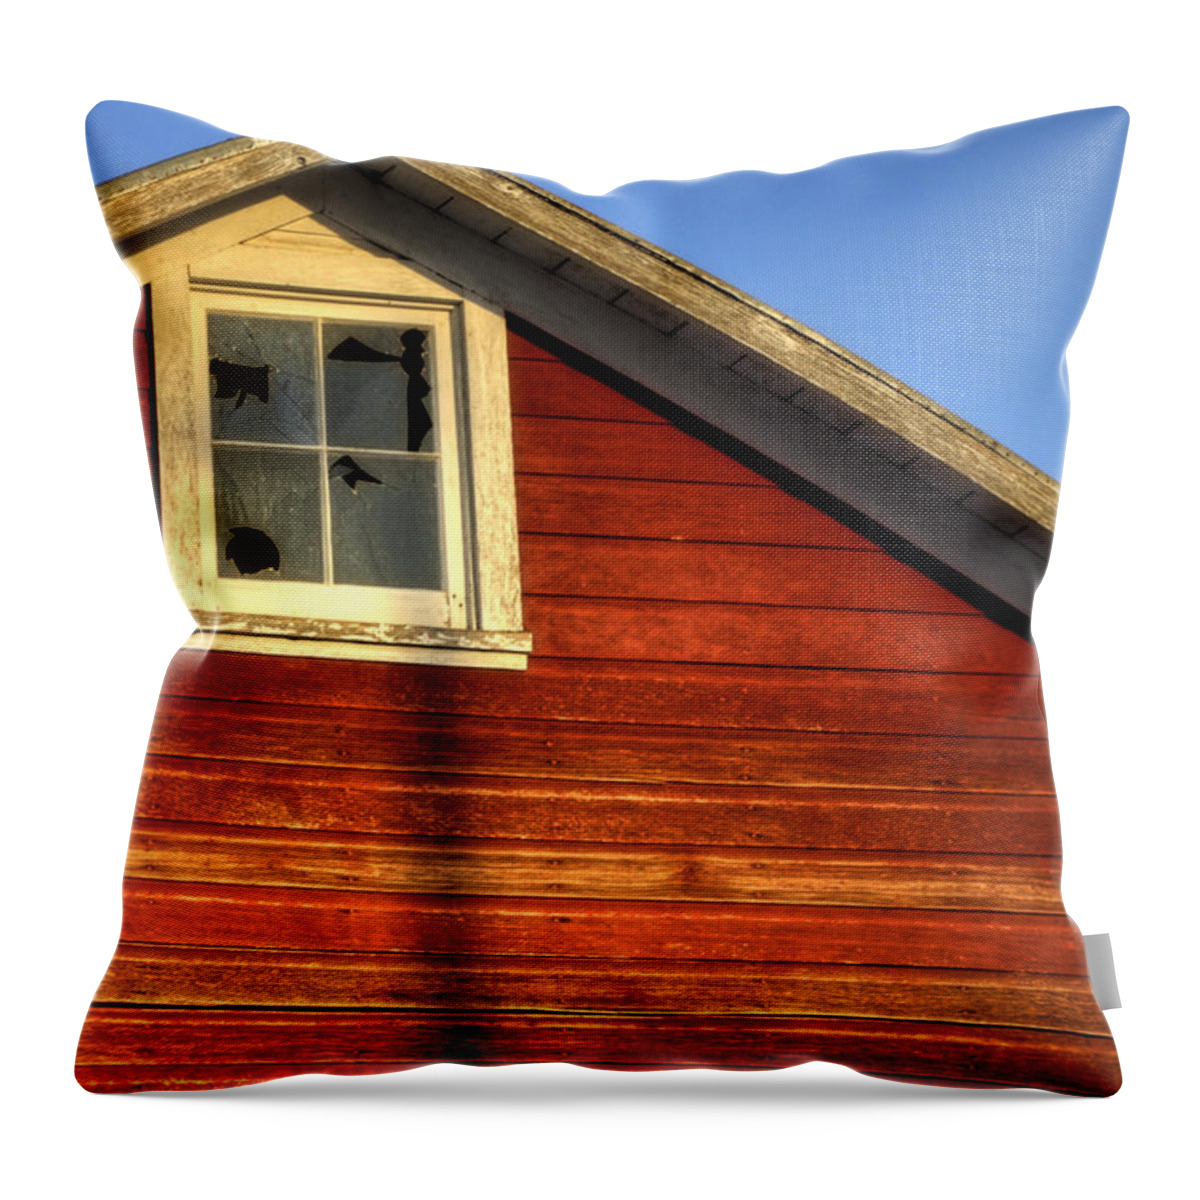 Ft Throw Pillow featuring the photograph Ft Collins Barn Sunset 2 13508 by Jerry Sodorff